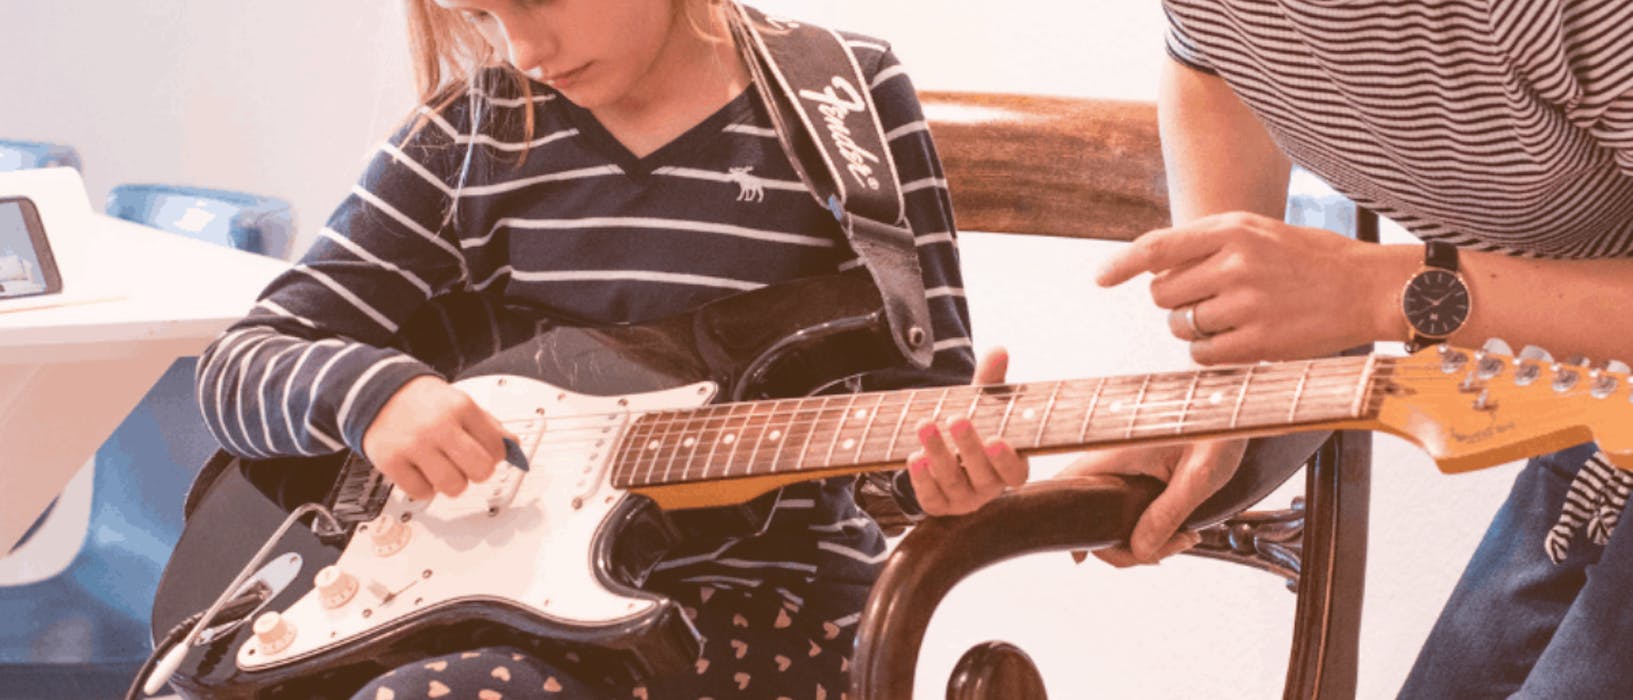 Fender's mobile strategy is music to your ears